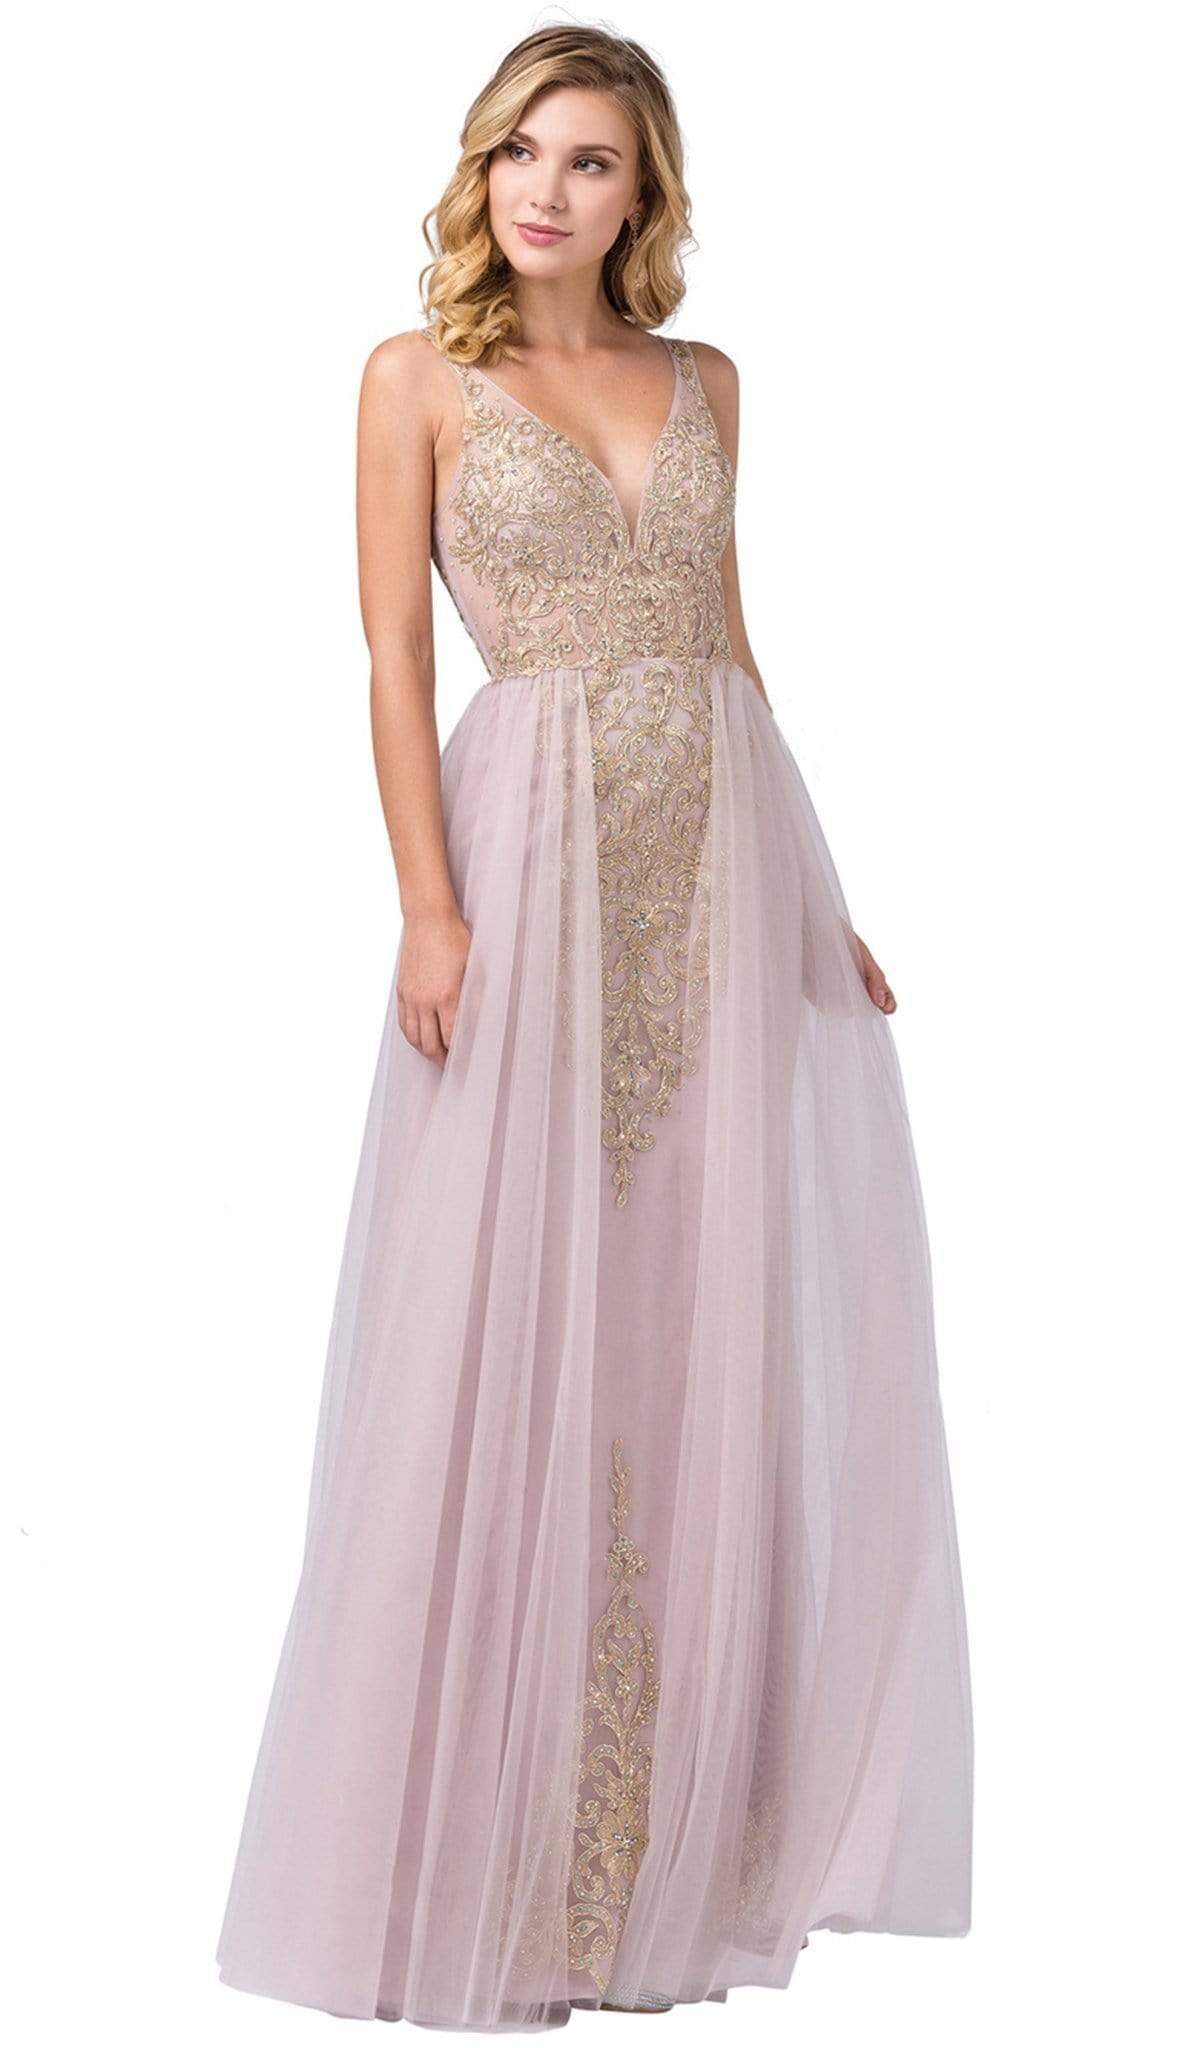 Image of Dancing Queen - 2525 Gilt-Appliqued Illusion Overskirt Gown